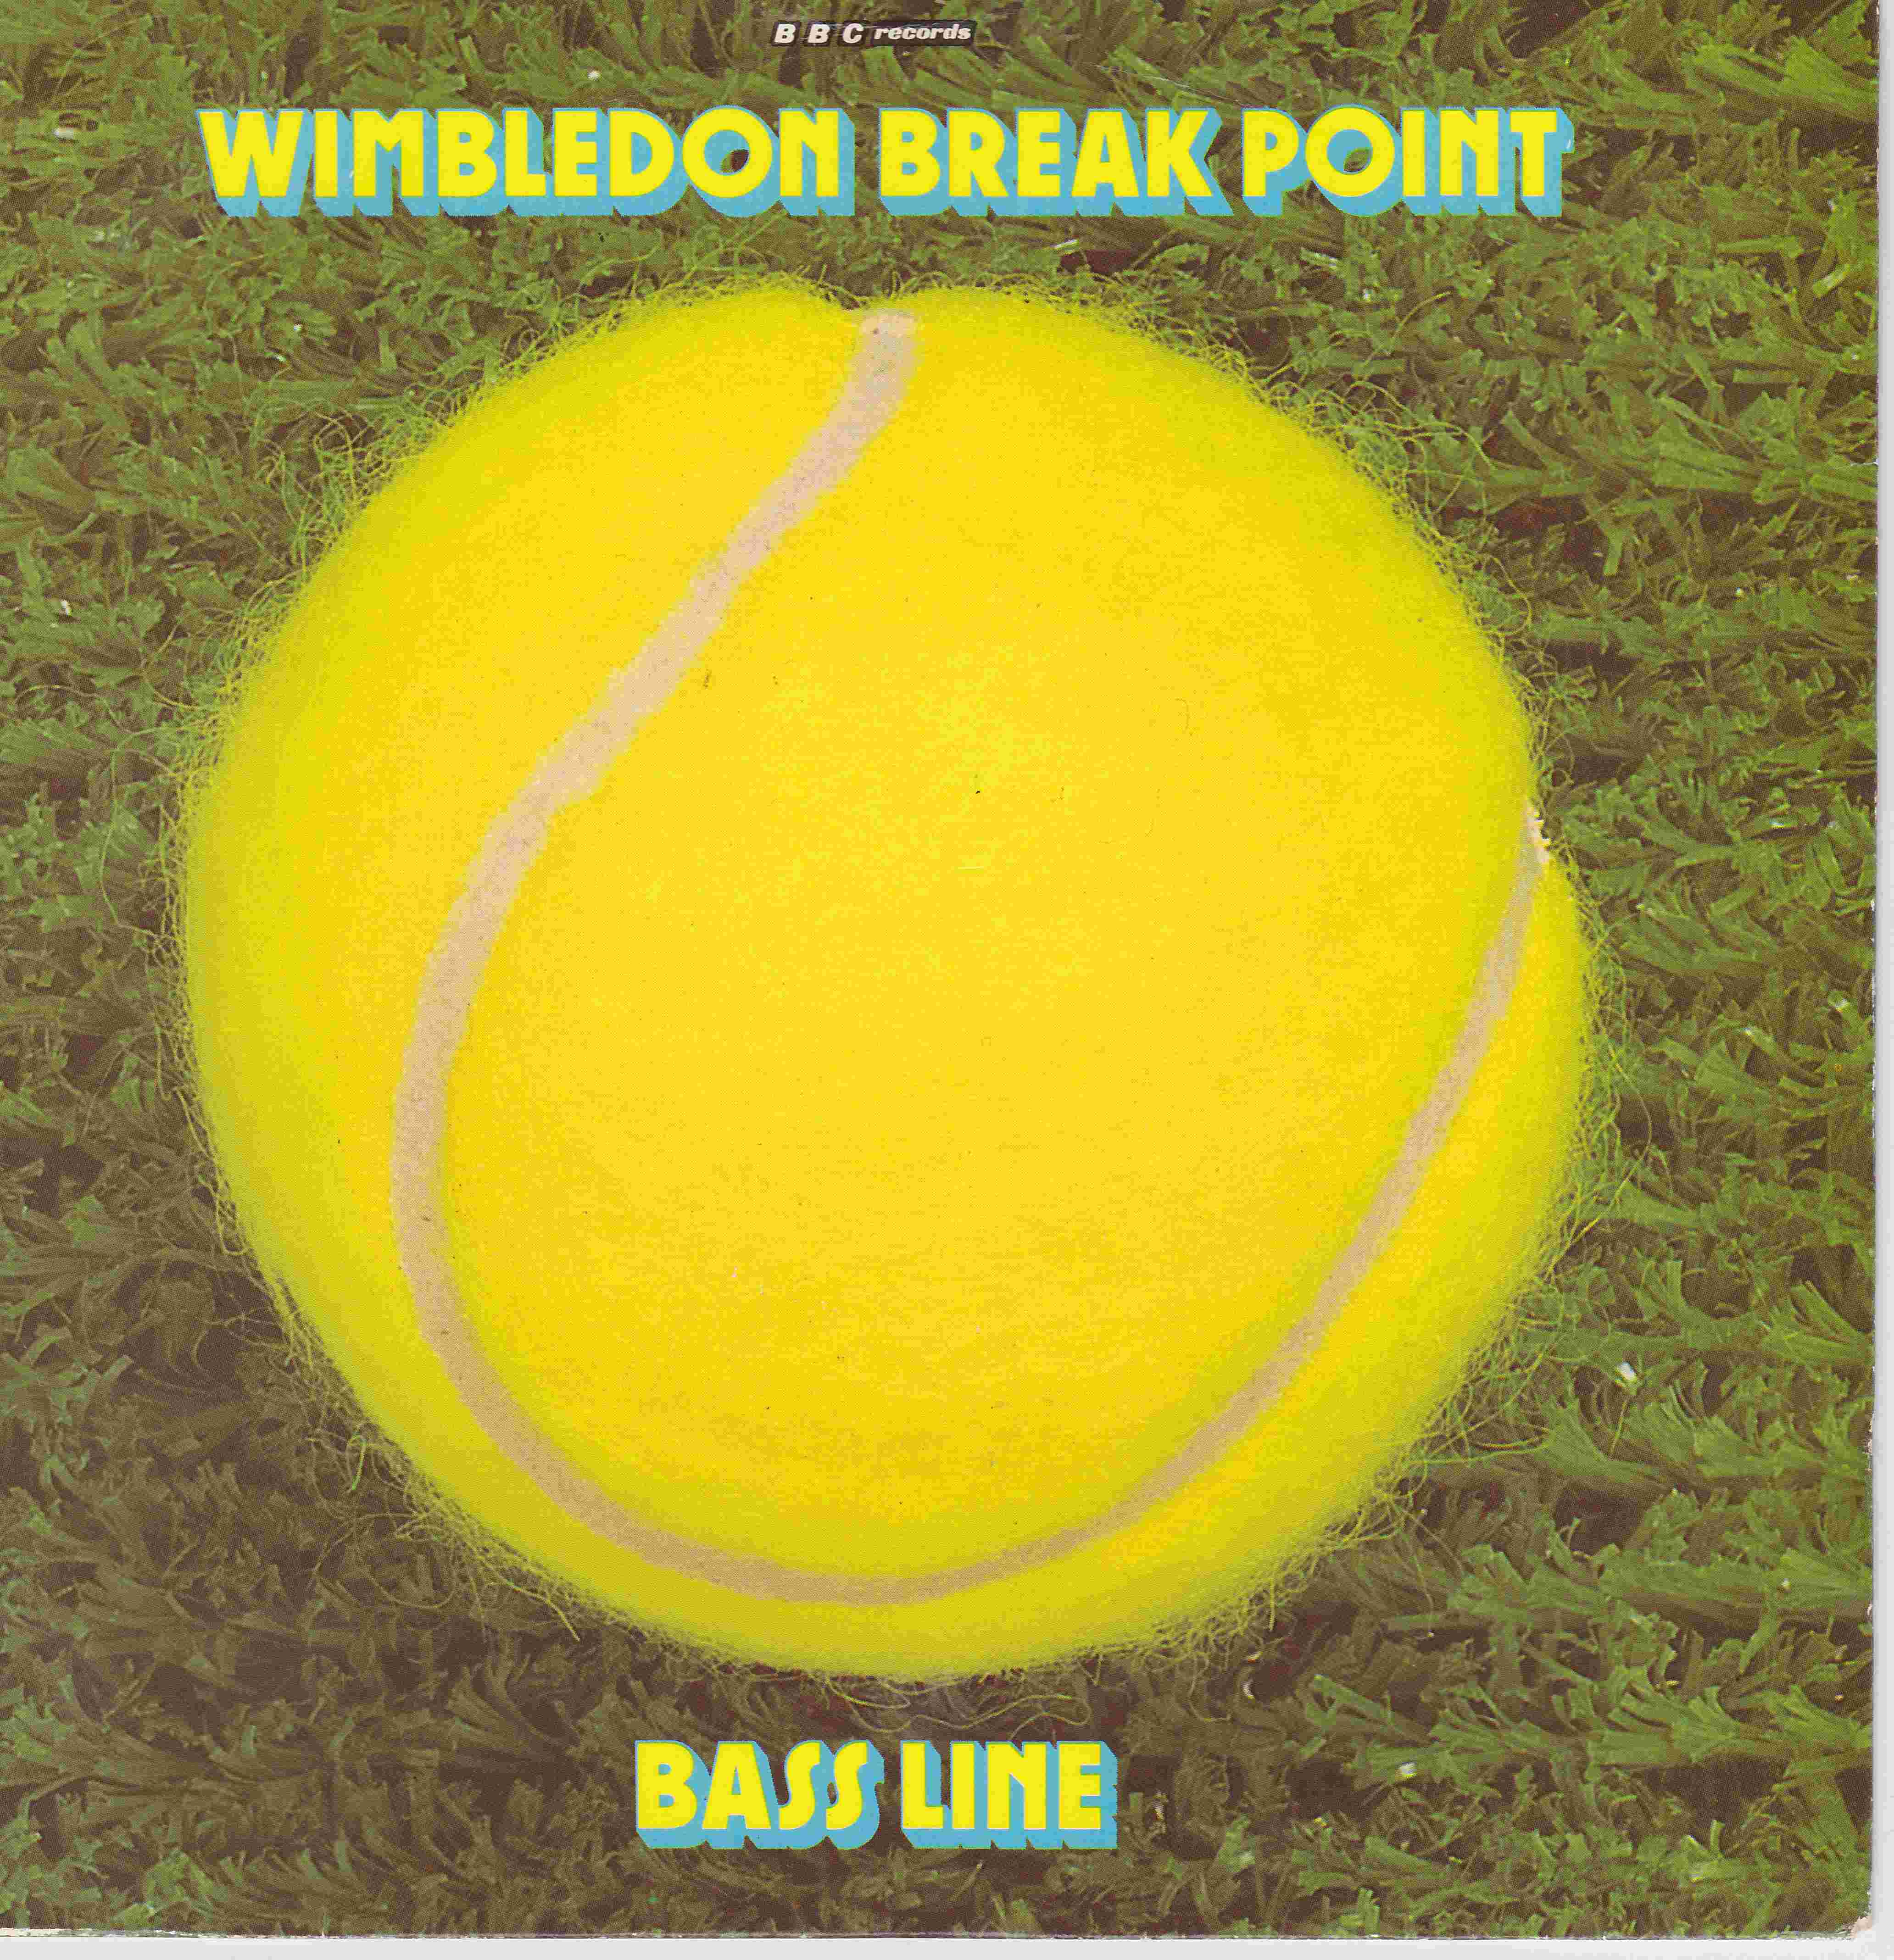 Picture of RESL 172 Wimbledon breakpoint by artist Baseline from the BBC singles - Records and Tapes library